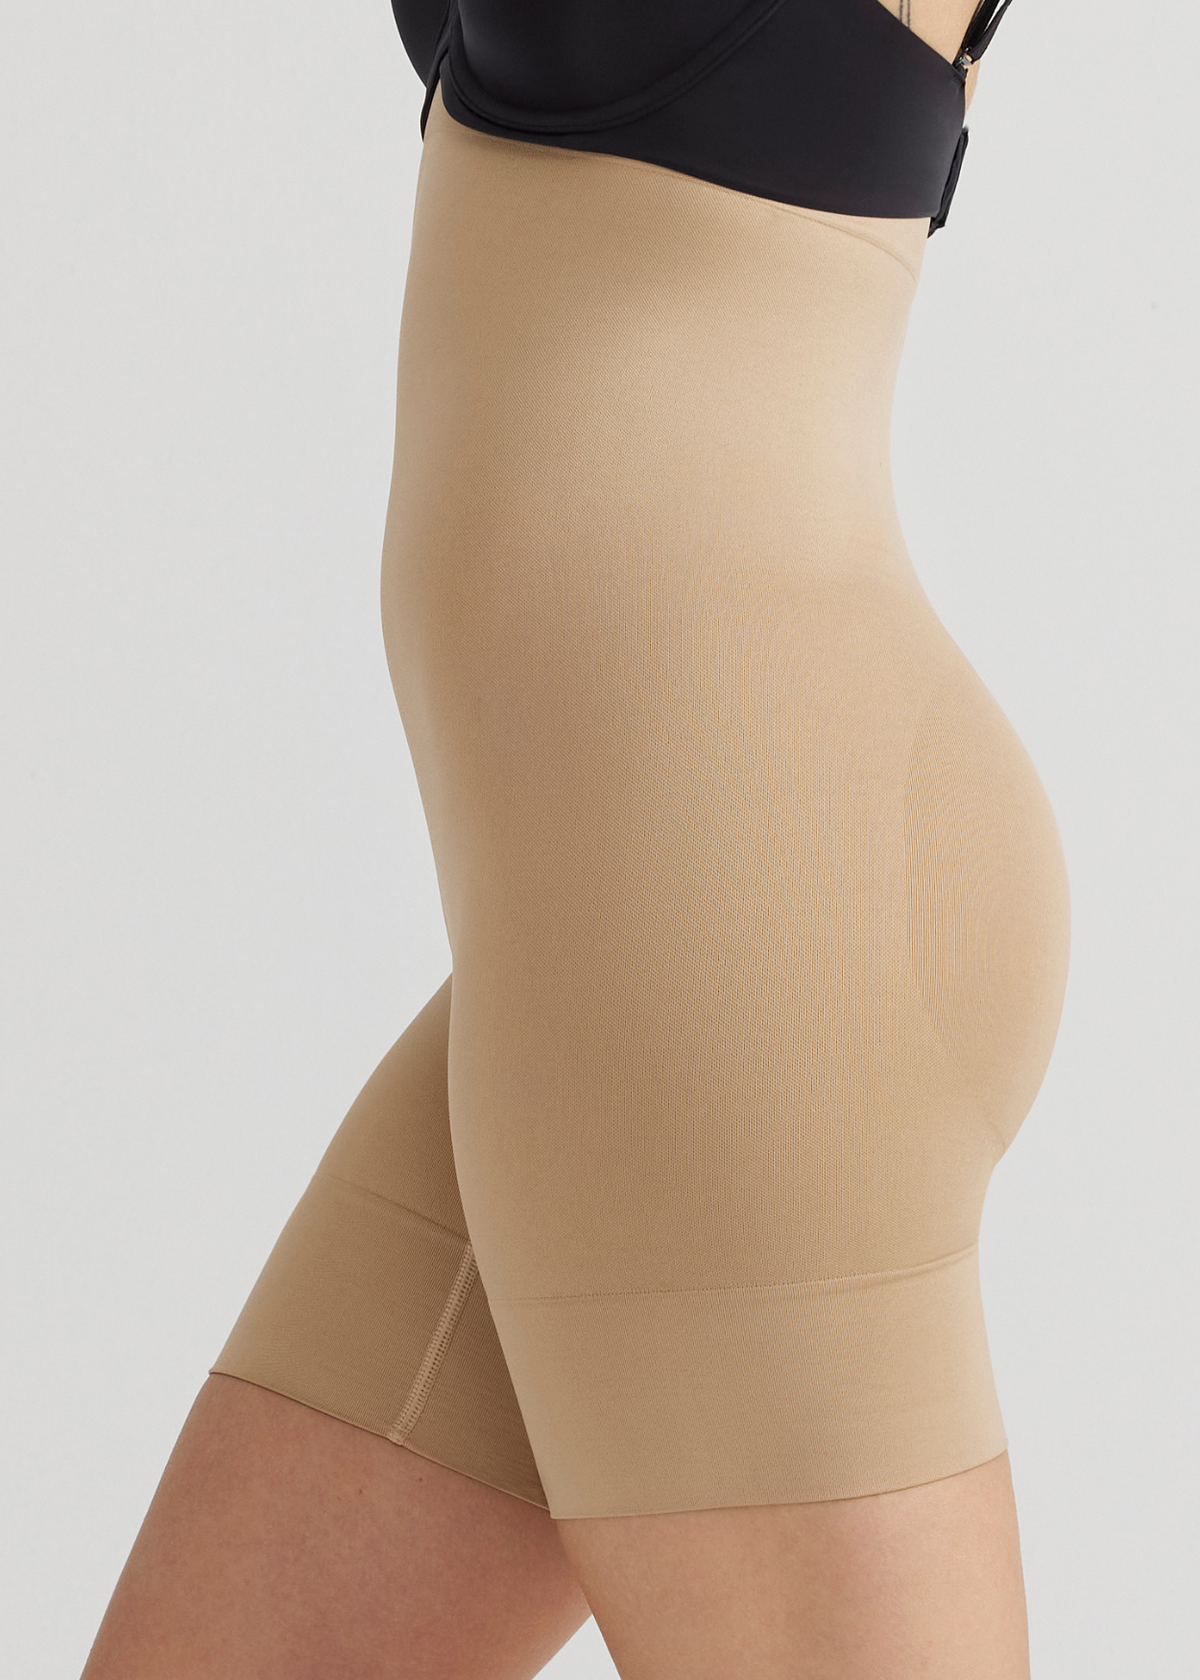 Seamless Solutions - High Waist Shaping Short w/ Rear Shaping from Yummie in Almond  - 1